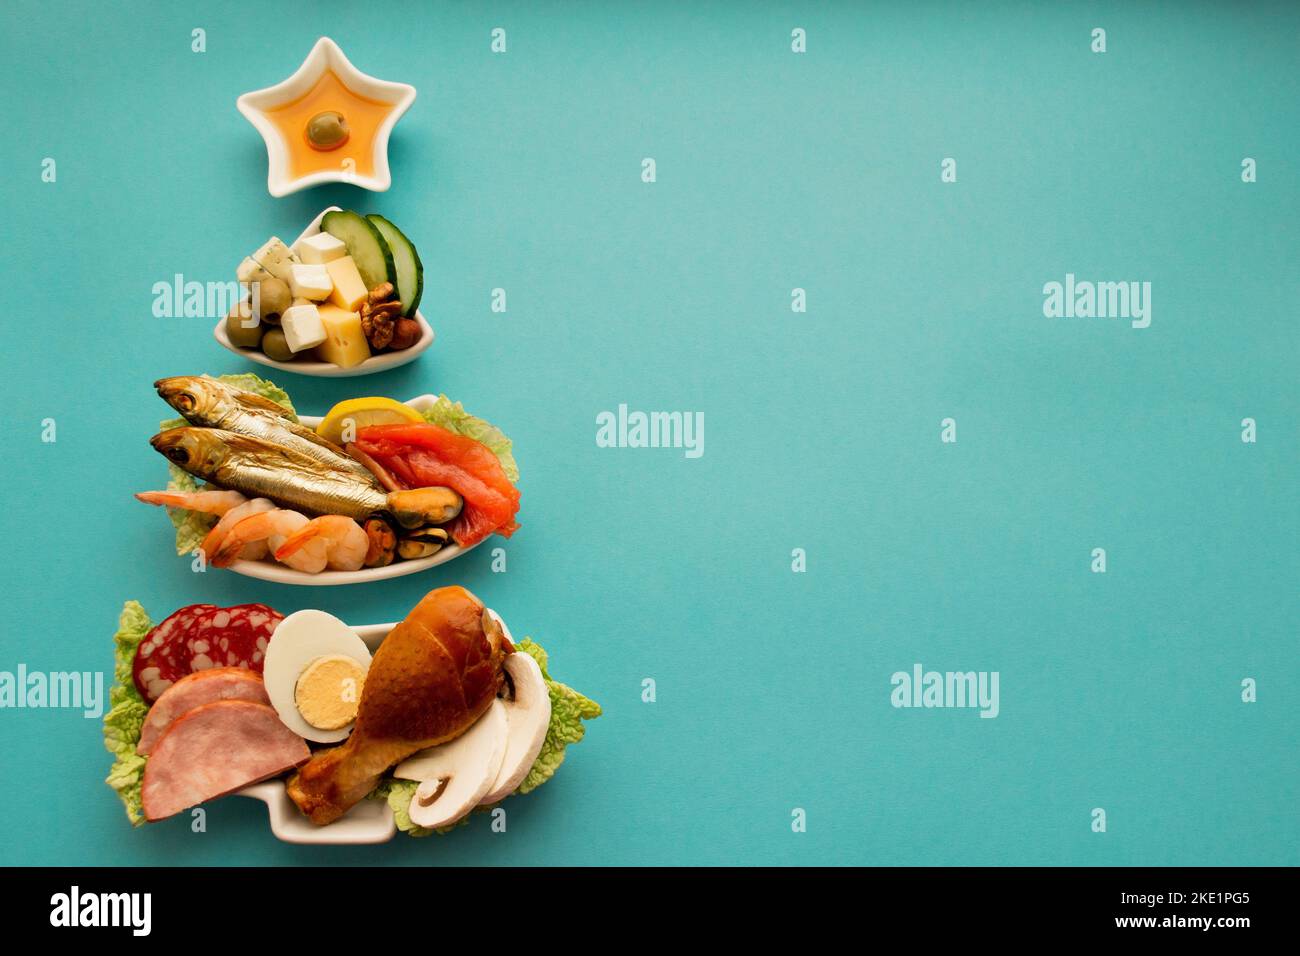 Plate in the form of a Christmas tree with protein food - meat, fish, cheeses, nuts, etc. Blue background. The concept of keto diet treats for the hol Stock Photo